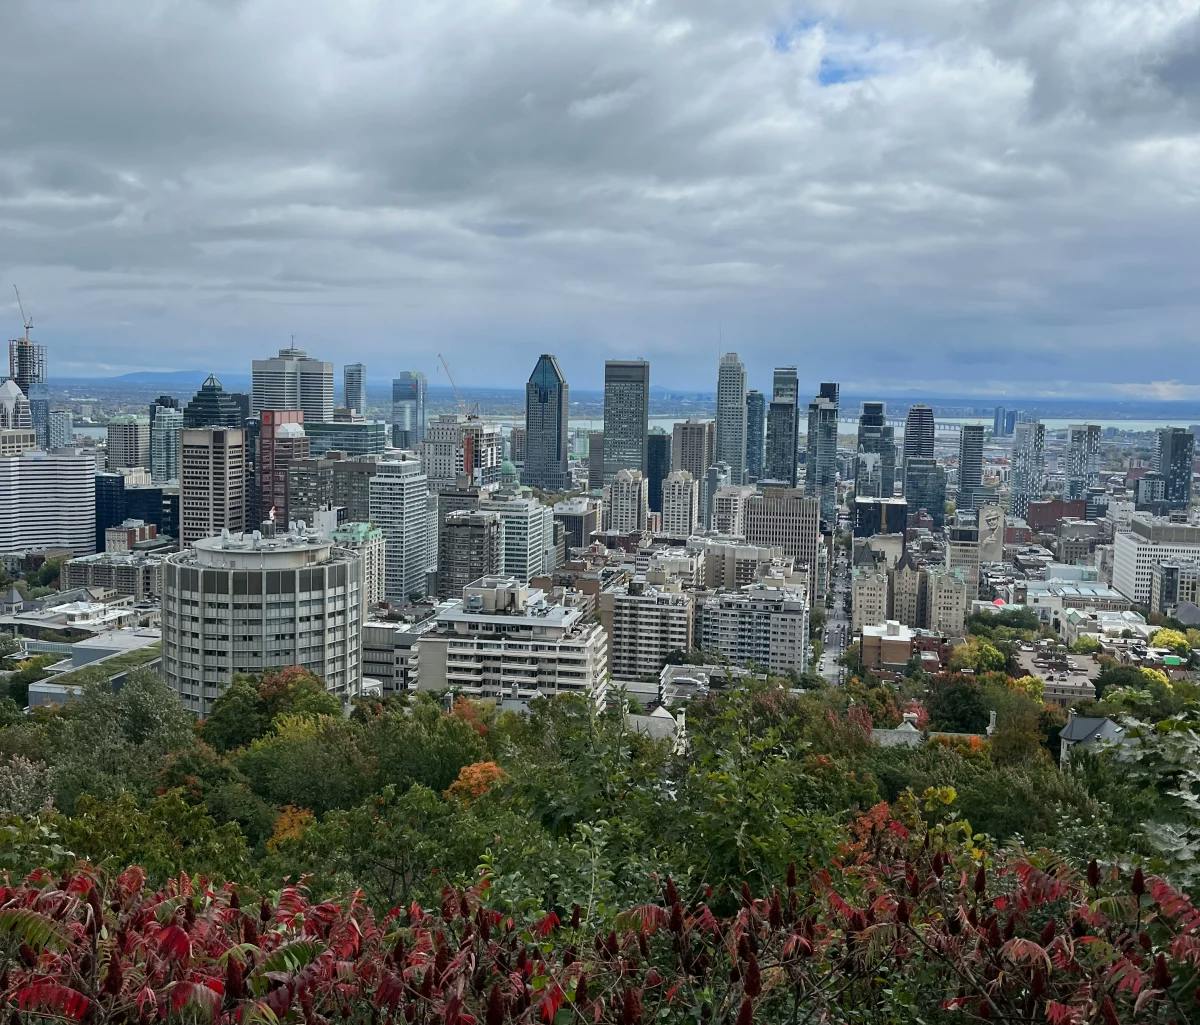 An aerial view of the city with tall buildings surrounded by trees with green and red leaves.